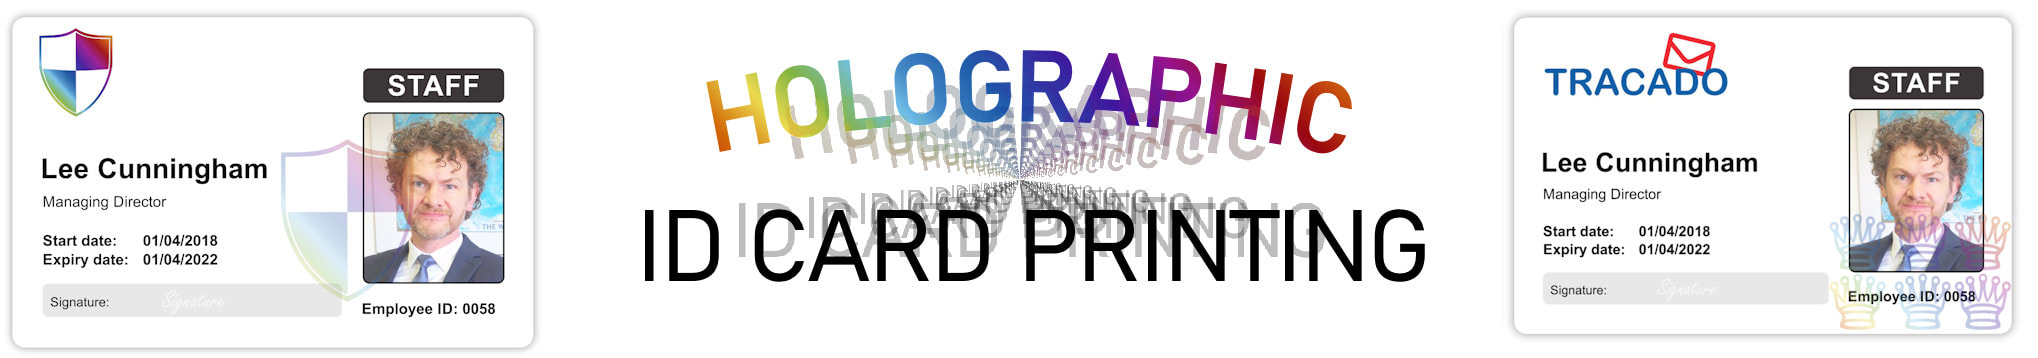 Sheffield holographic ID card print service. Employee Identity cards with hologram or holograph security mark.